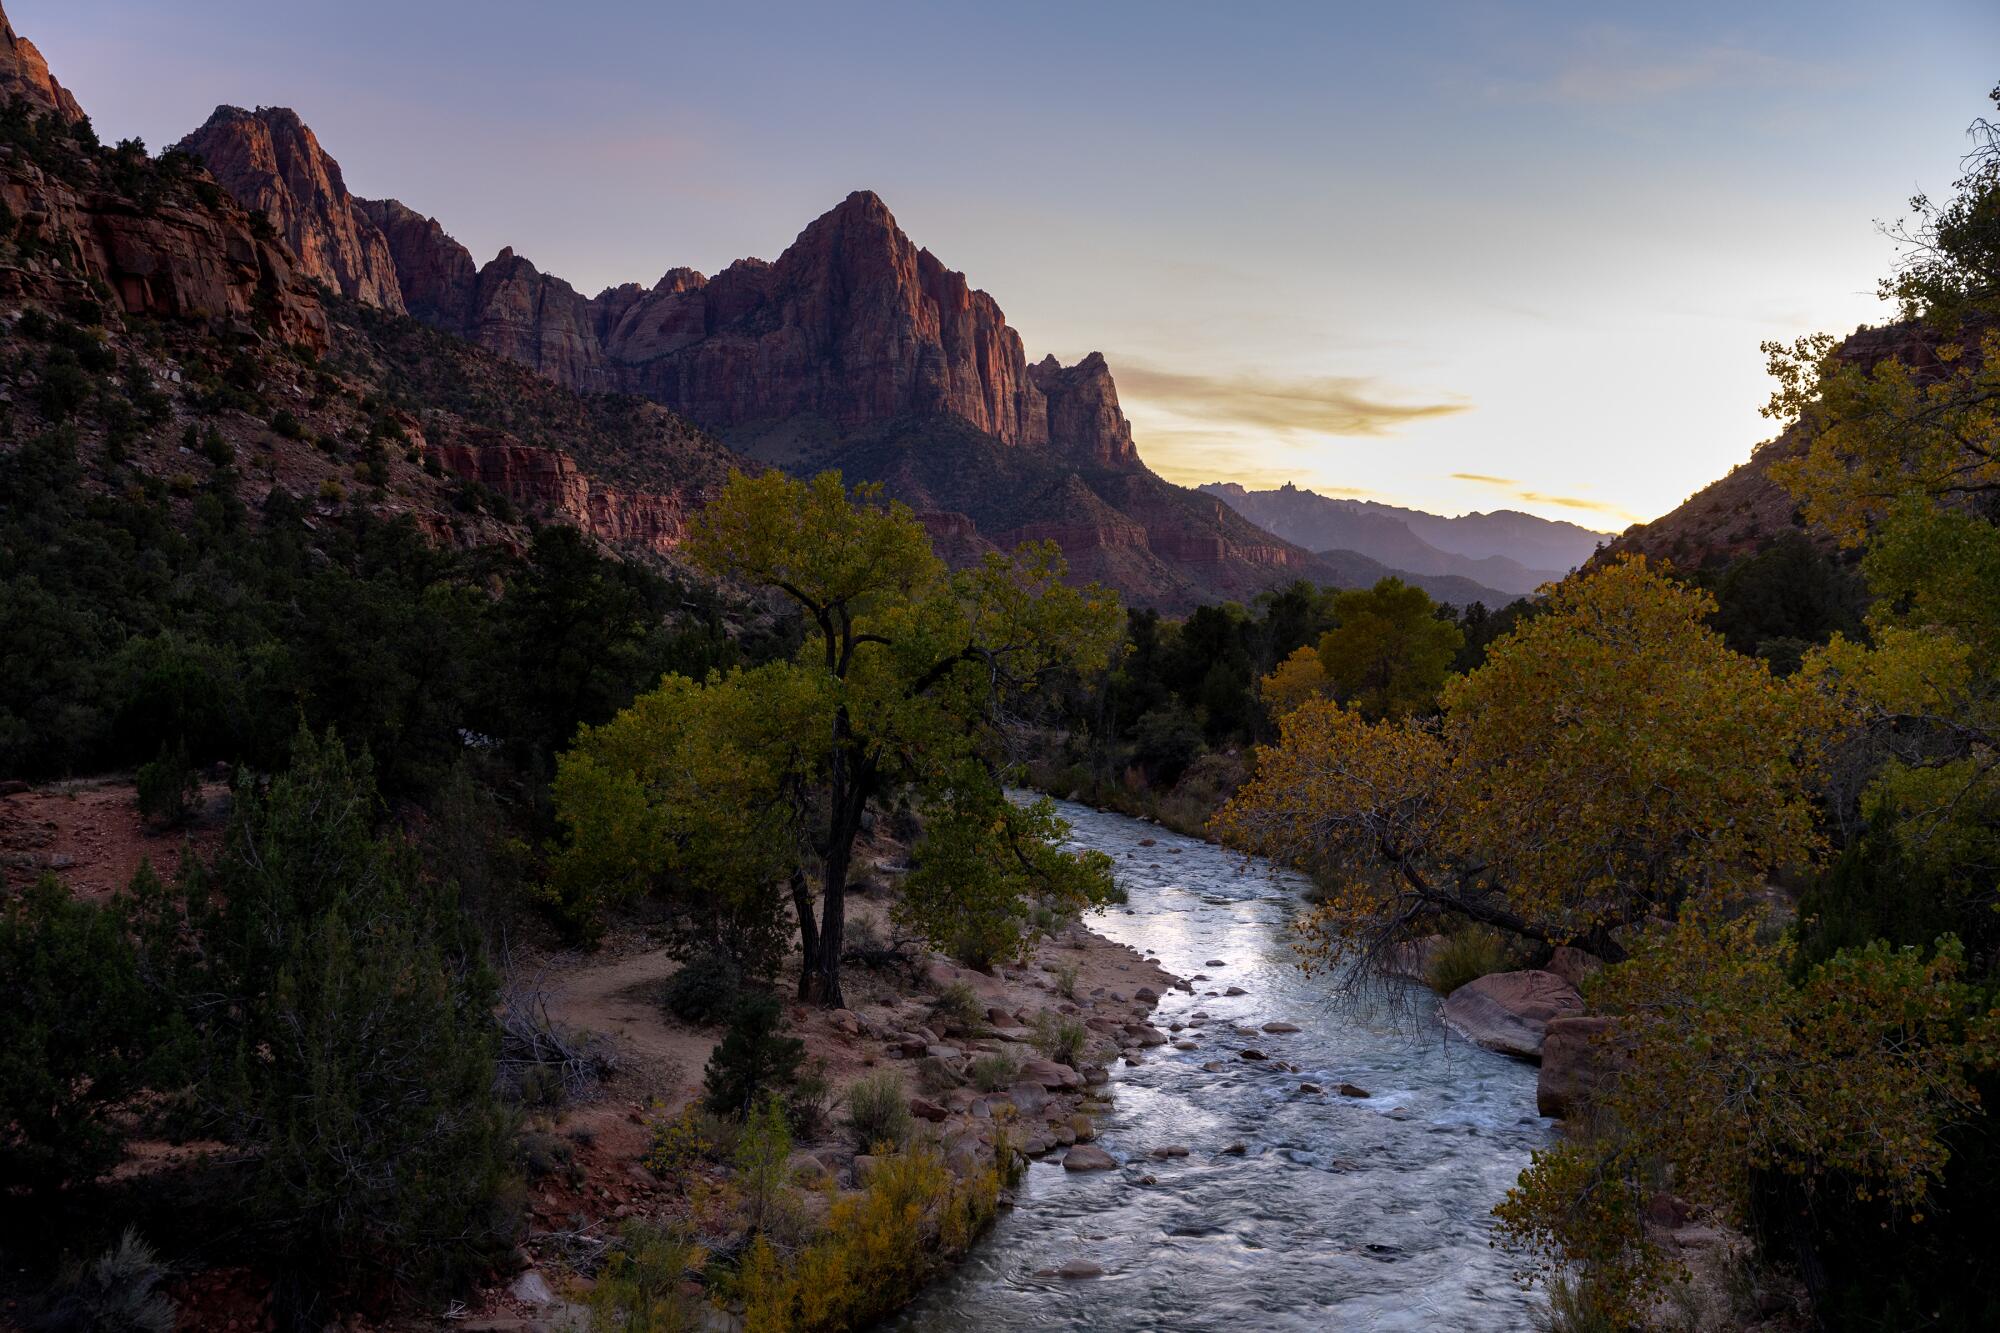  View of the Virgin River flowing through Zion Canyon